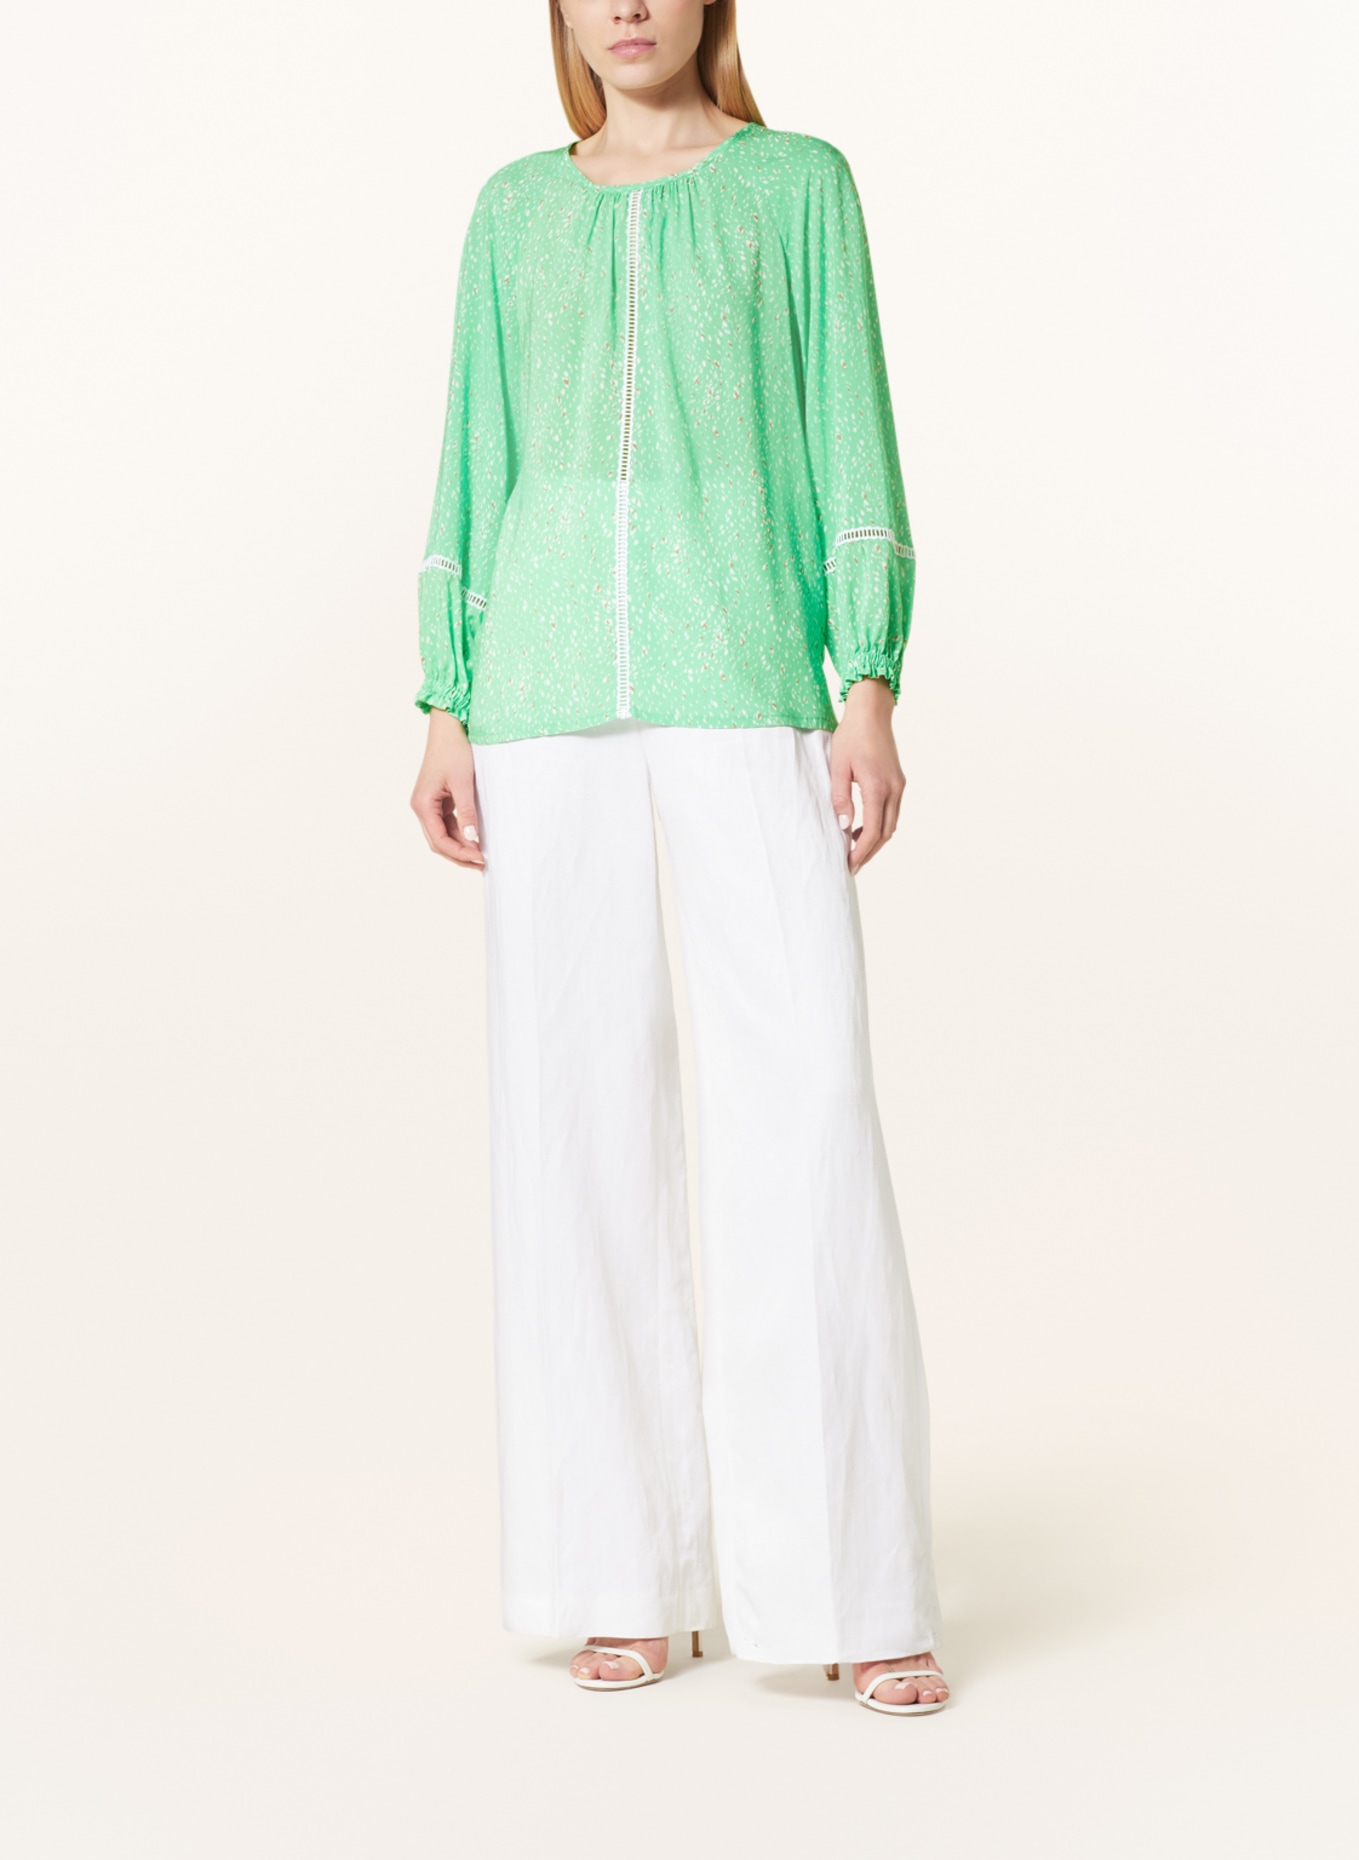 RIANI Shirt blouse with broderie anglaise, Color: LIGHT GREEN/ TAUPE/ WHITE (Image 2)